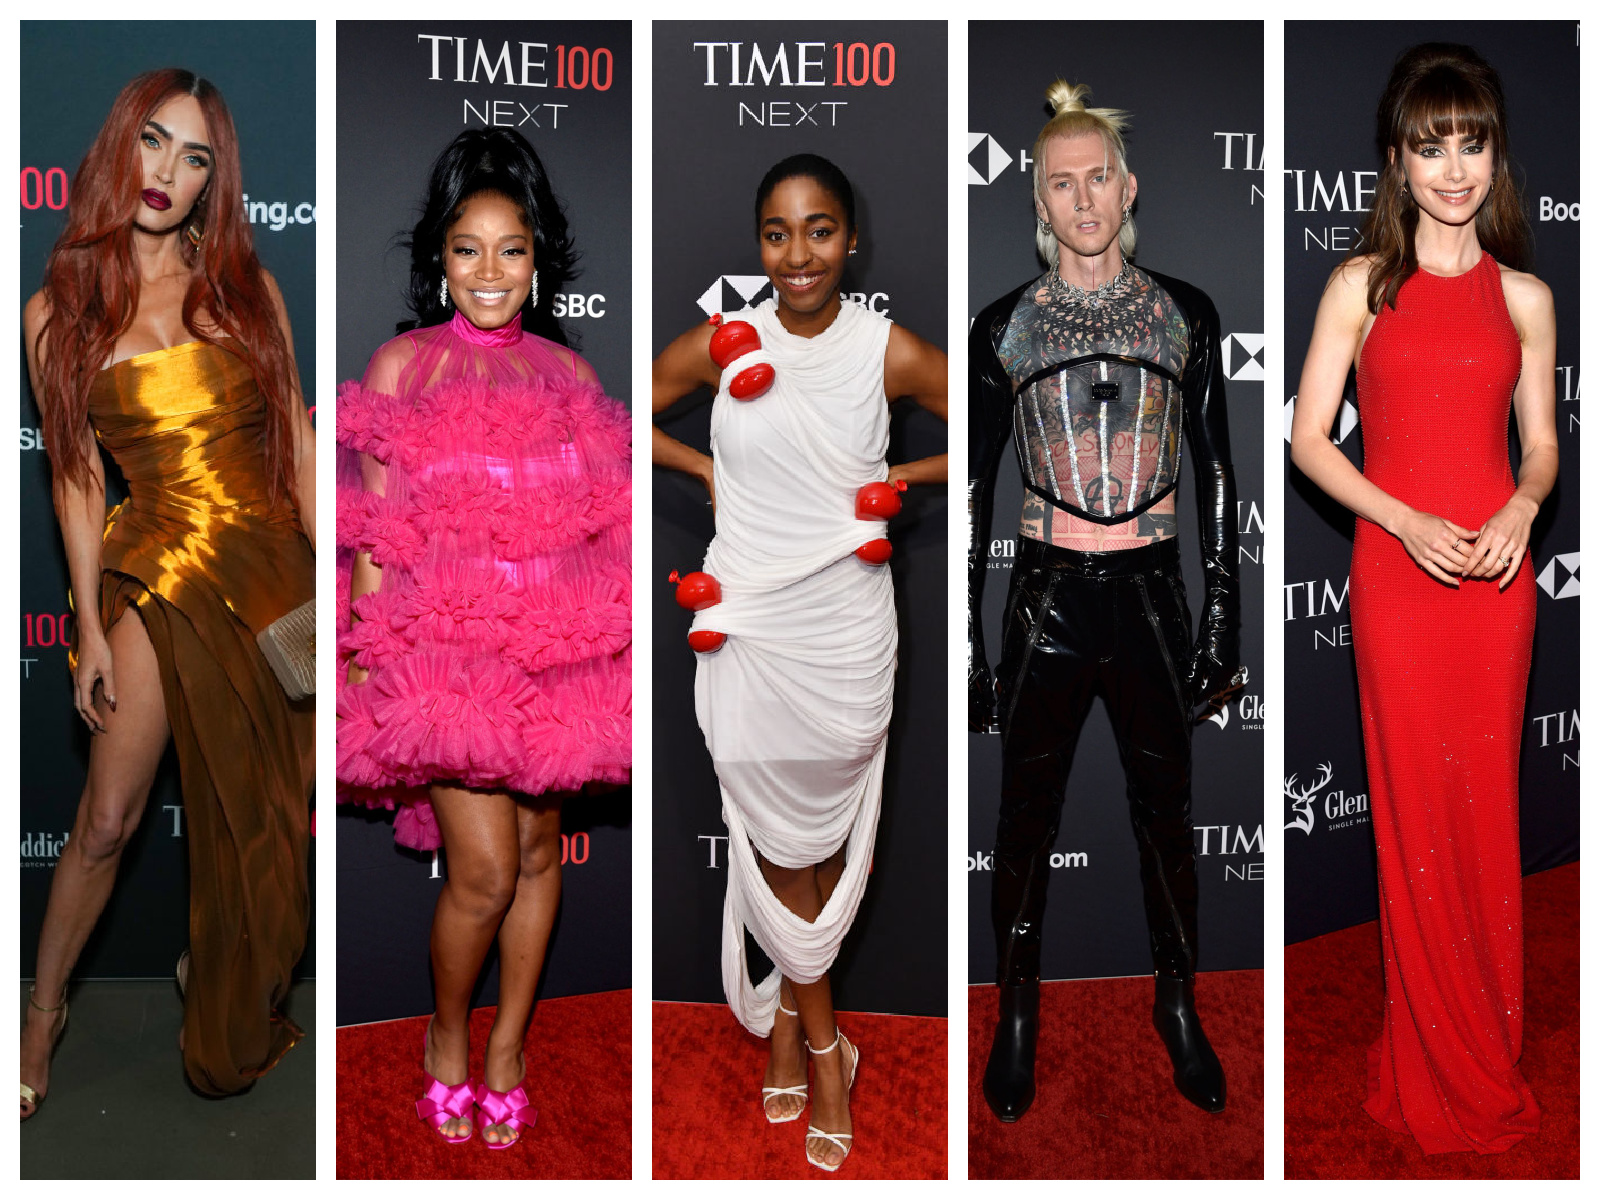 Highlights of the Time100 Next Gala Include a Fluffy Confection and a ...